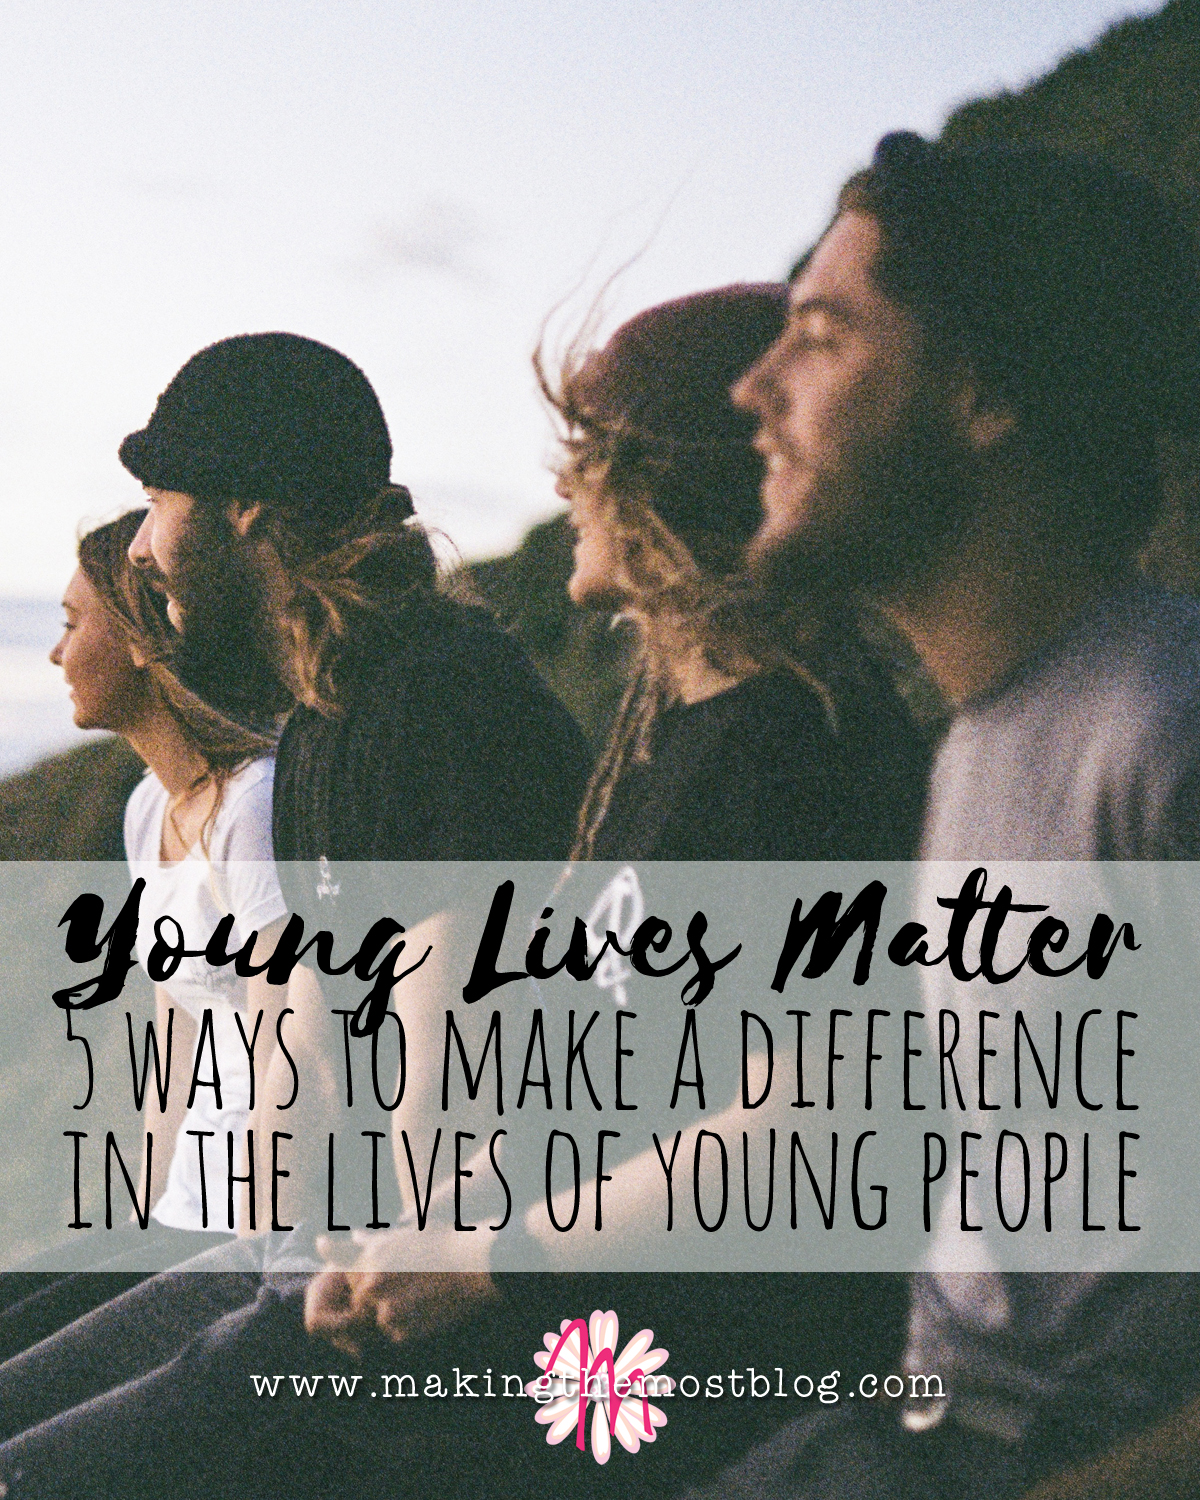 Young Lives Matter: 5 Ways to Make a Difference in the Lives of Young People | Making the Most Blog